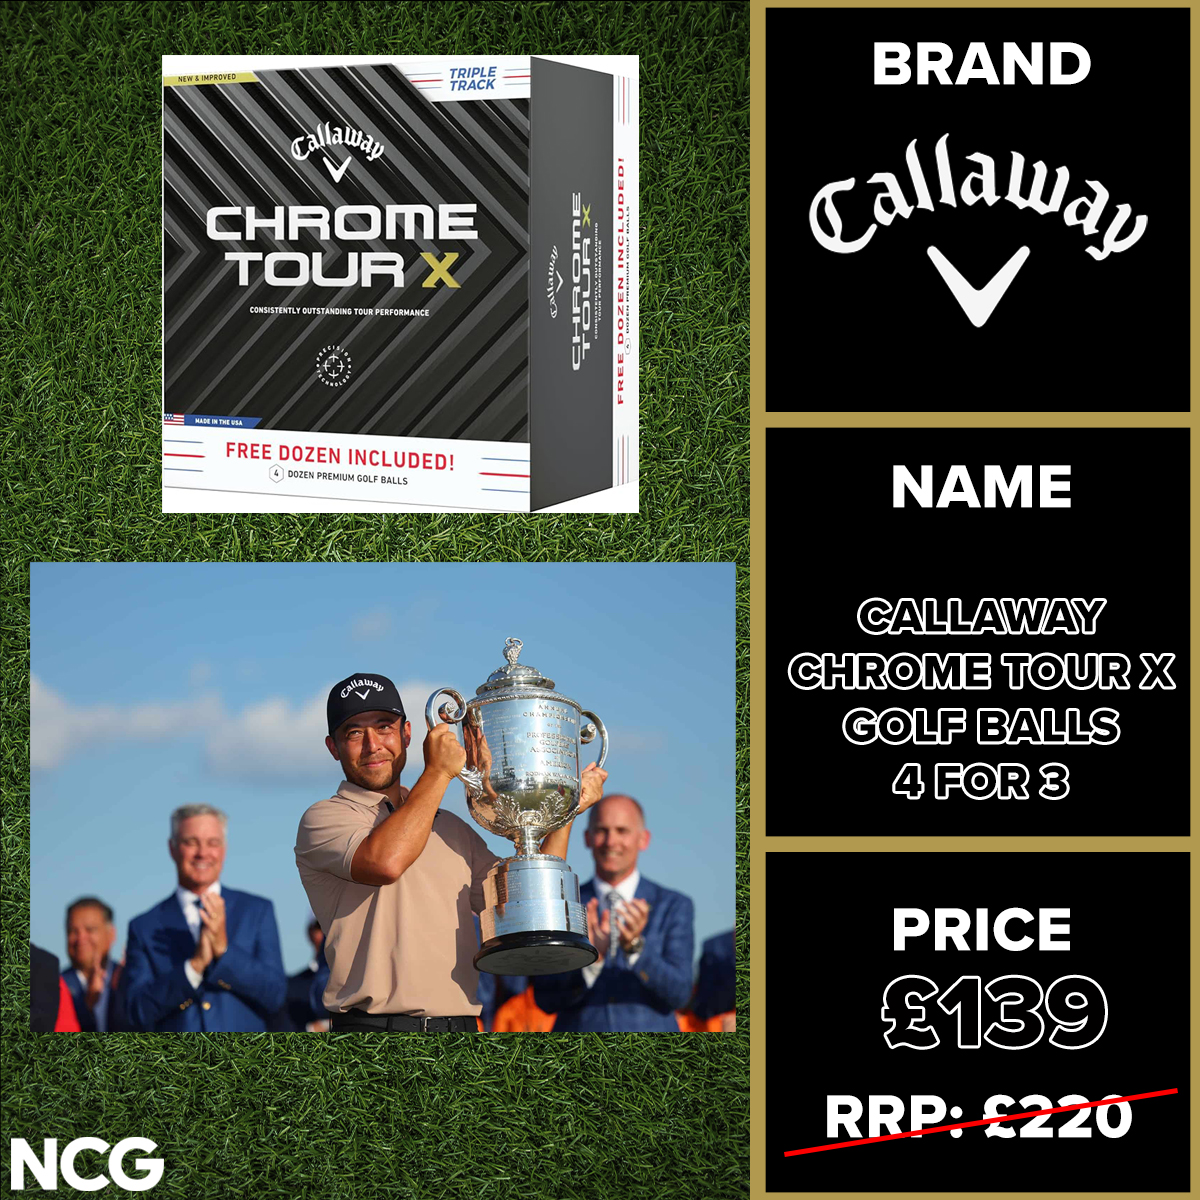 Get the ball of the PGA Champion - currently 4 for 3 offer >>> geni.us/eXTB3